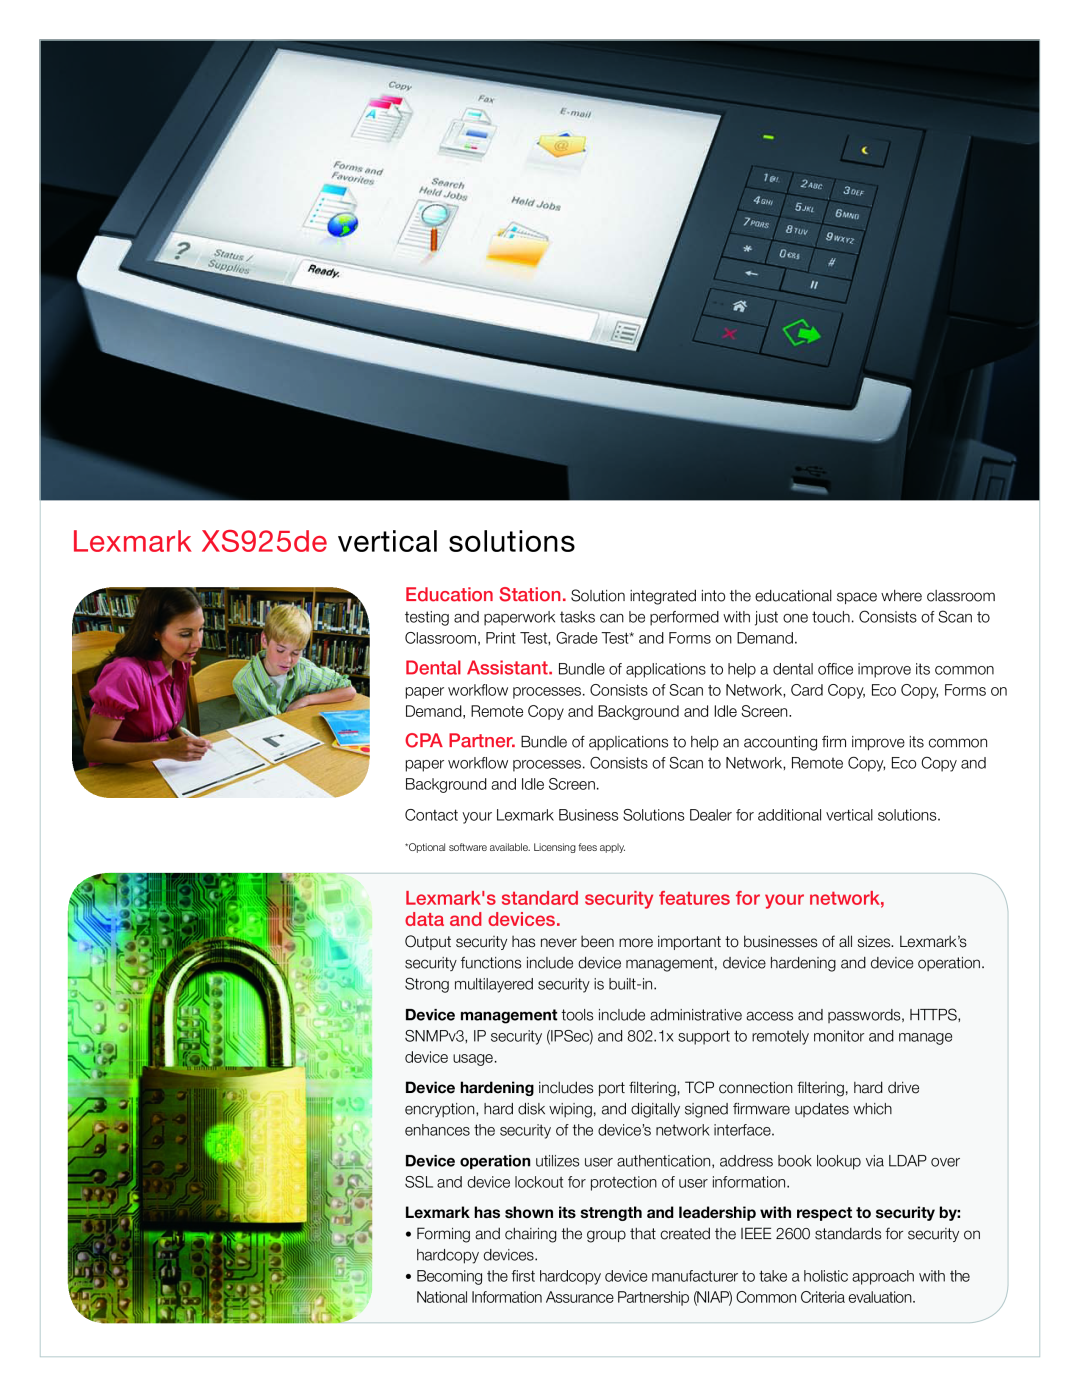 Lexmark Color MFP manual Lexmark XS925de vertical solutions, Optional software available. Licensing fees apply 